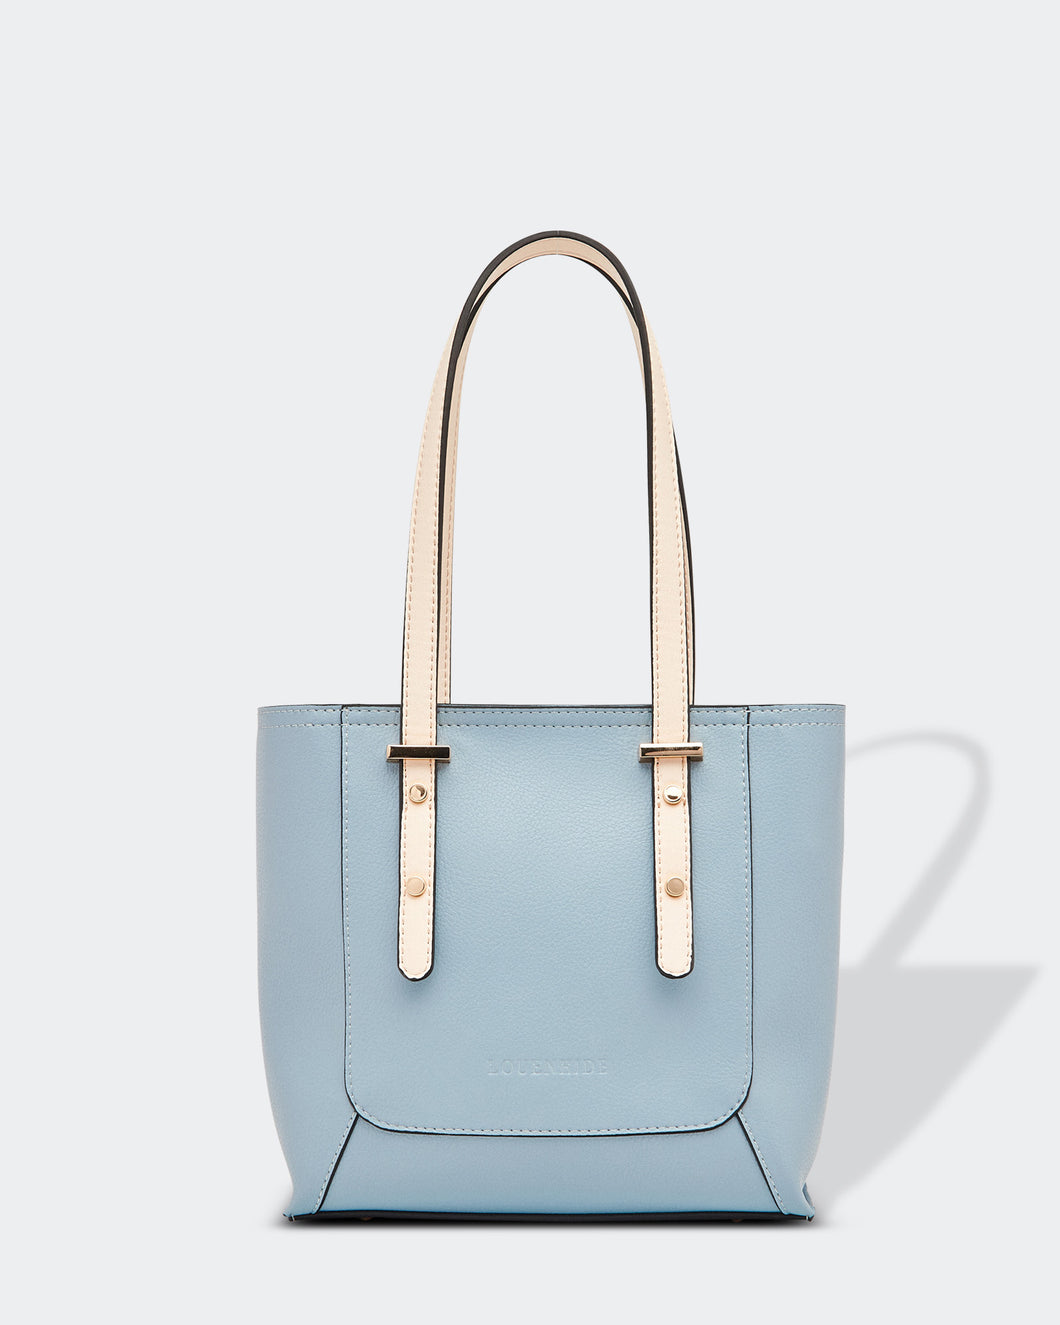 Small, sweet and on-trend!  This gorgeous Pale Blue Hazel Handbag screams Audrey Hepburn!!  Such a classic style and easy to carry, this perfectly sized handbag has more than enough room for all your essentials.  Features:  1 x Phone Pocket 1 Flat Pocket Feet on base Internal lining Strap Height: 20cm Extension strap: 110cm Adjustable Detachable Closure: Secure Zip Material: Vegan Leather  Hardware: Light Gold  Dimensions: W22 x H21 x D8 cm